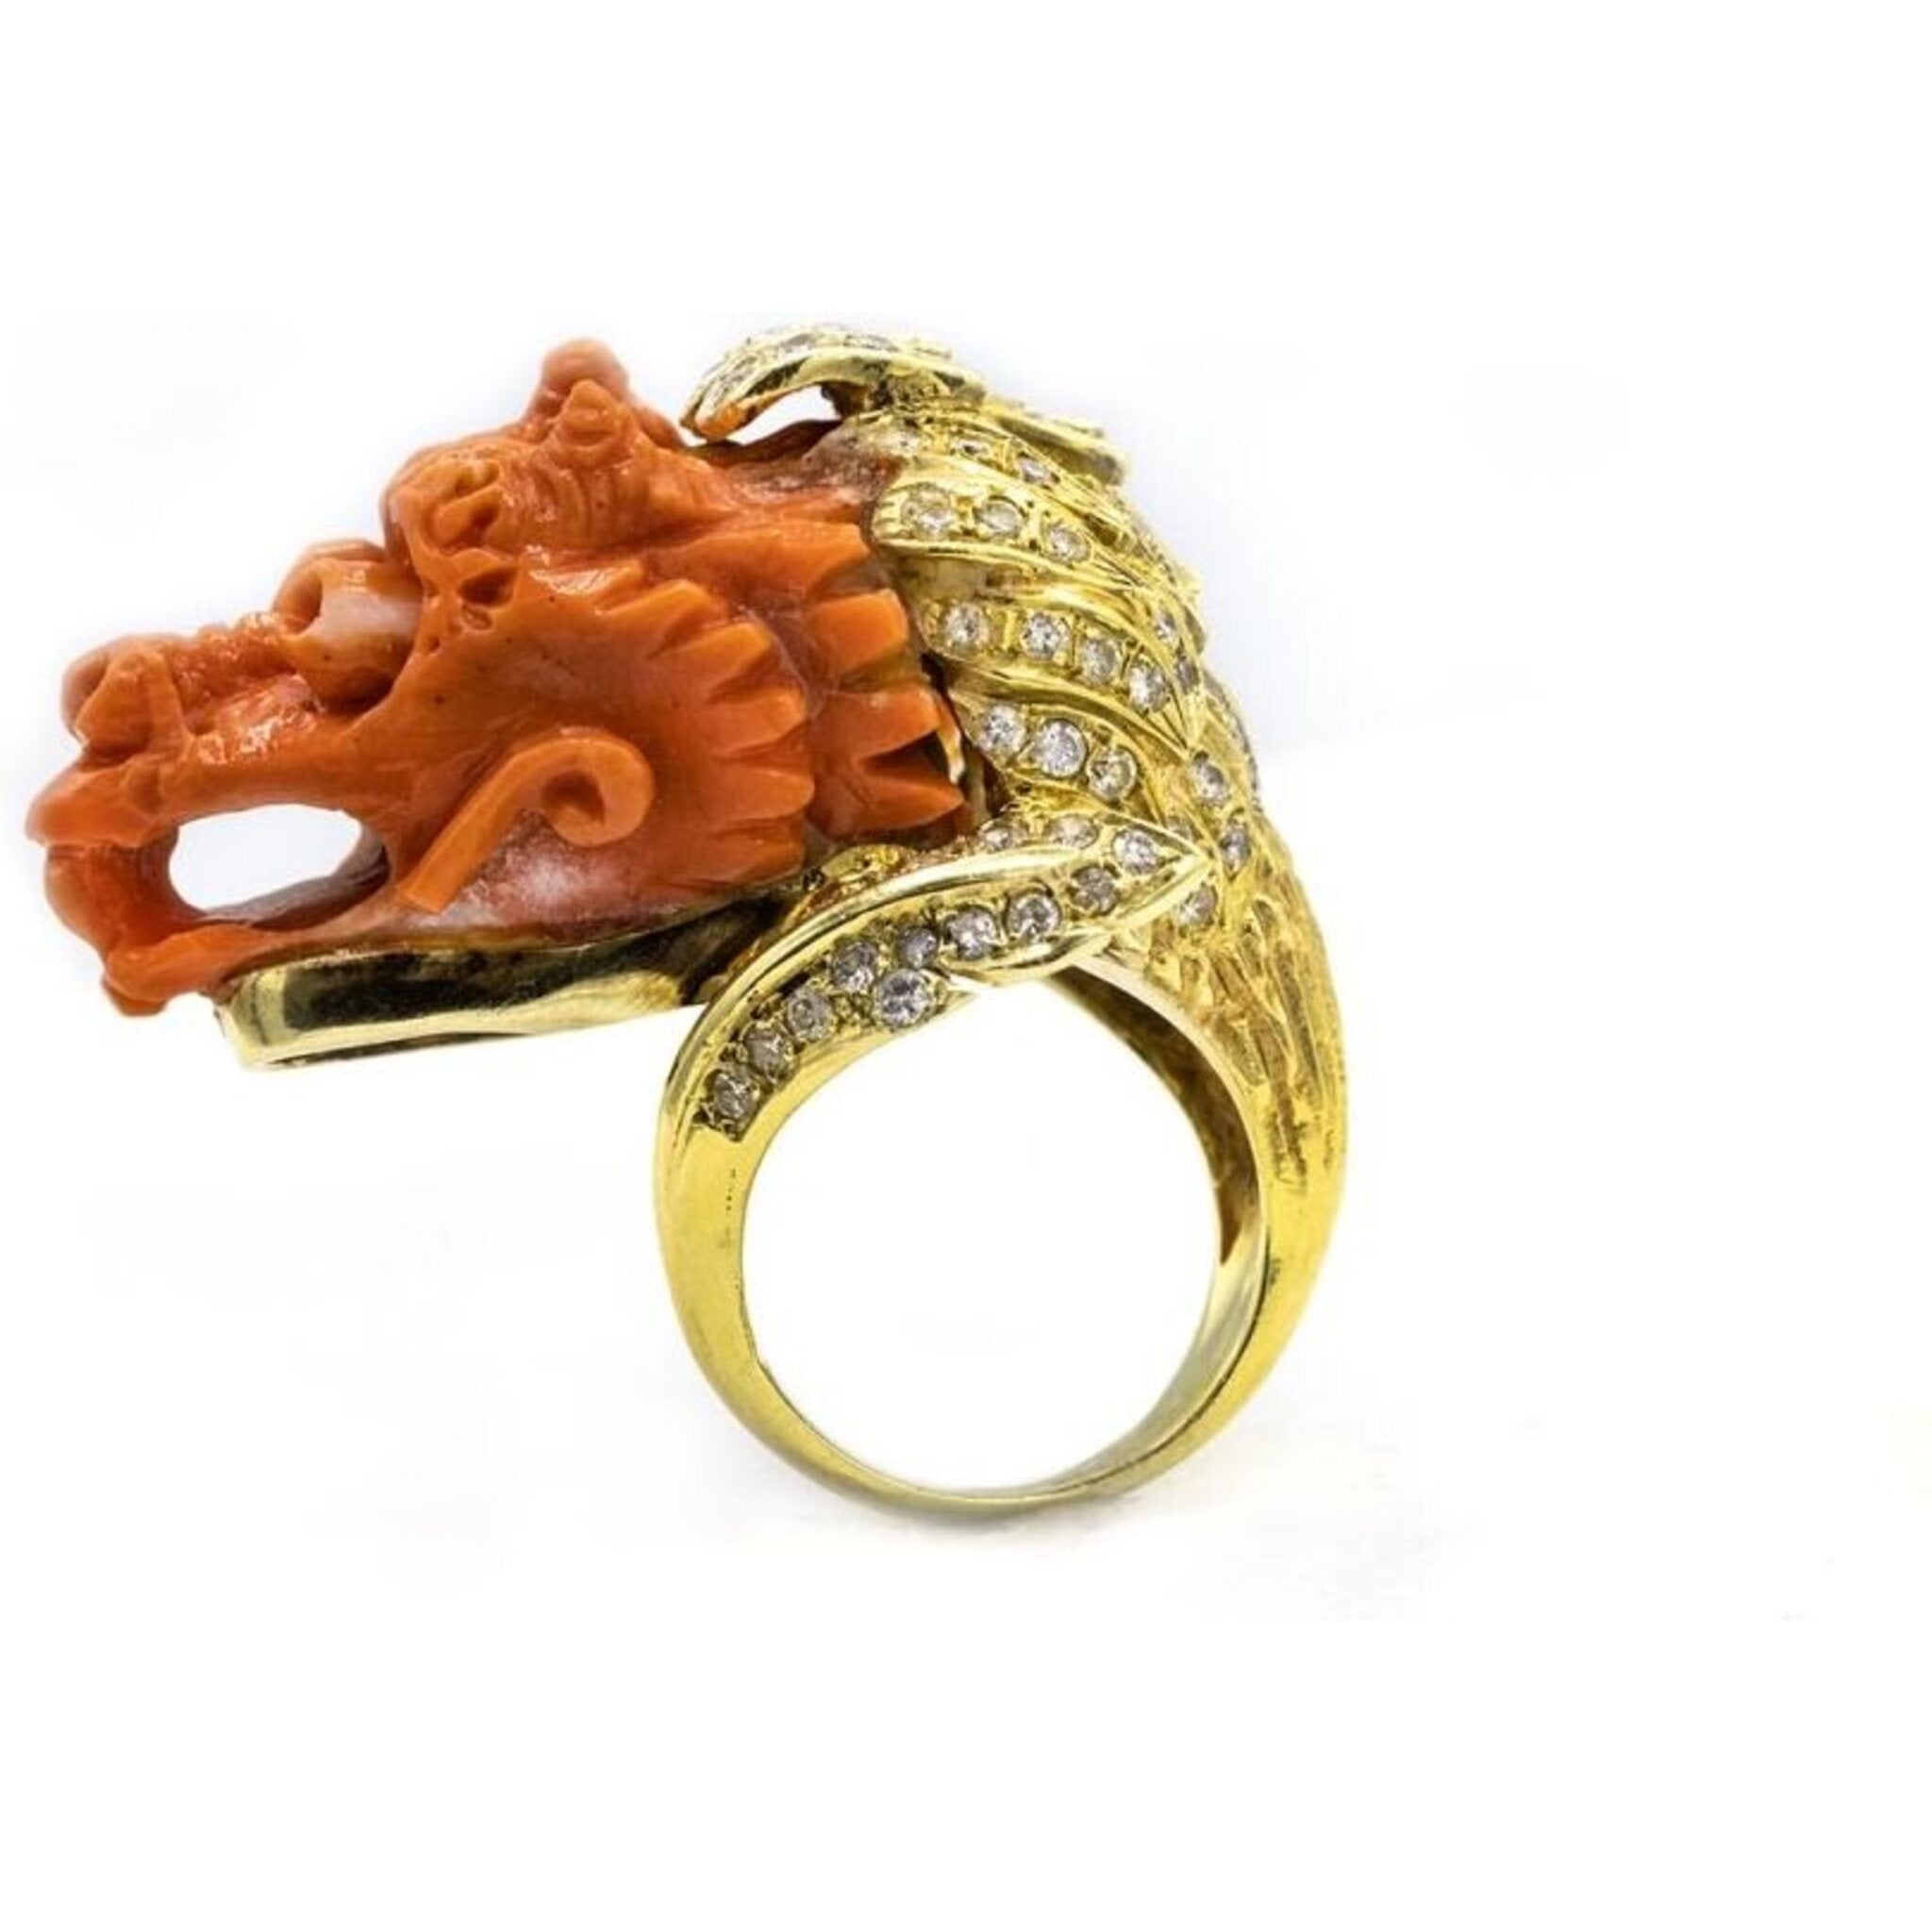 Detailed Dragon Stainless Steel Ring Scr4032 | Wholesale Jewelry Website